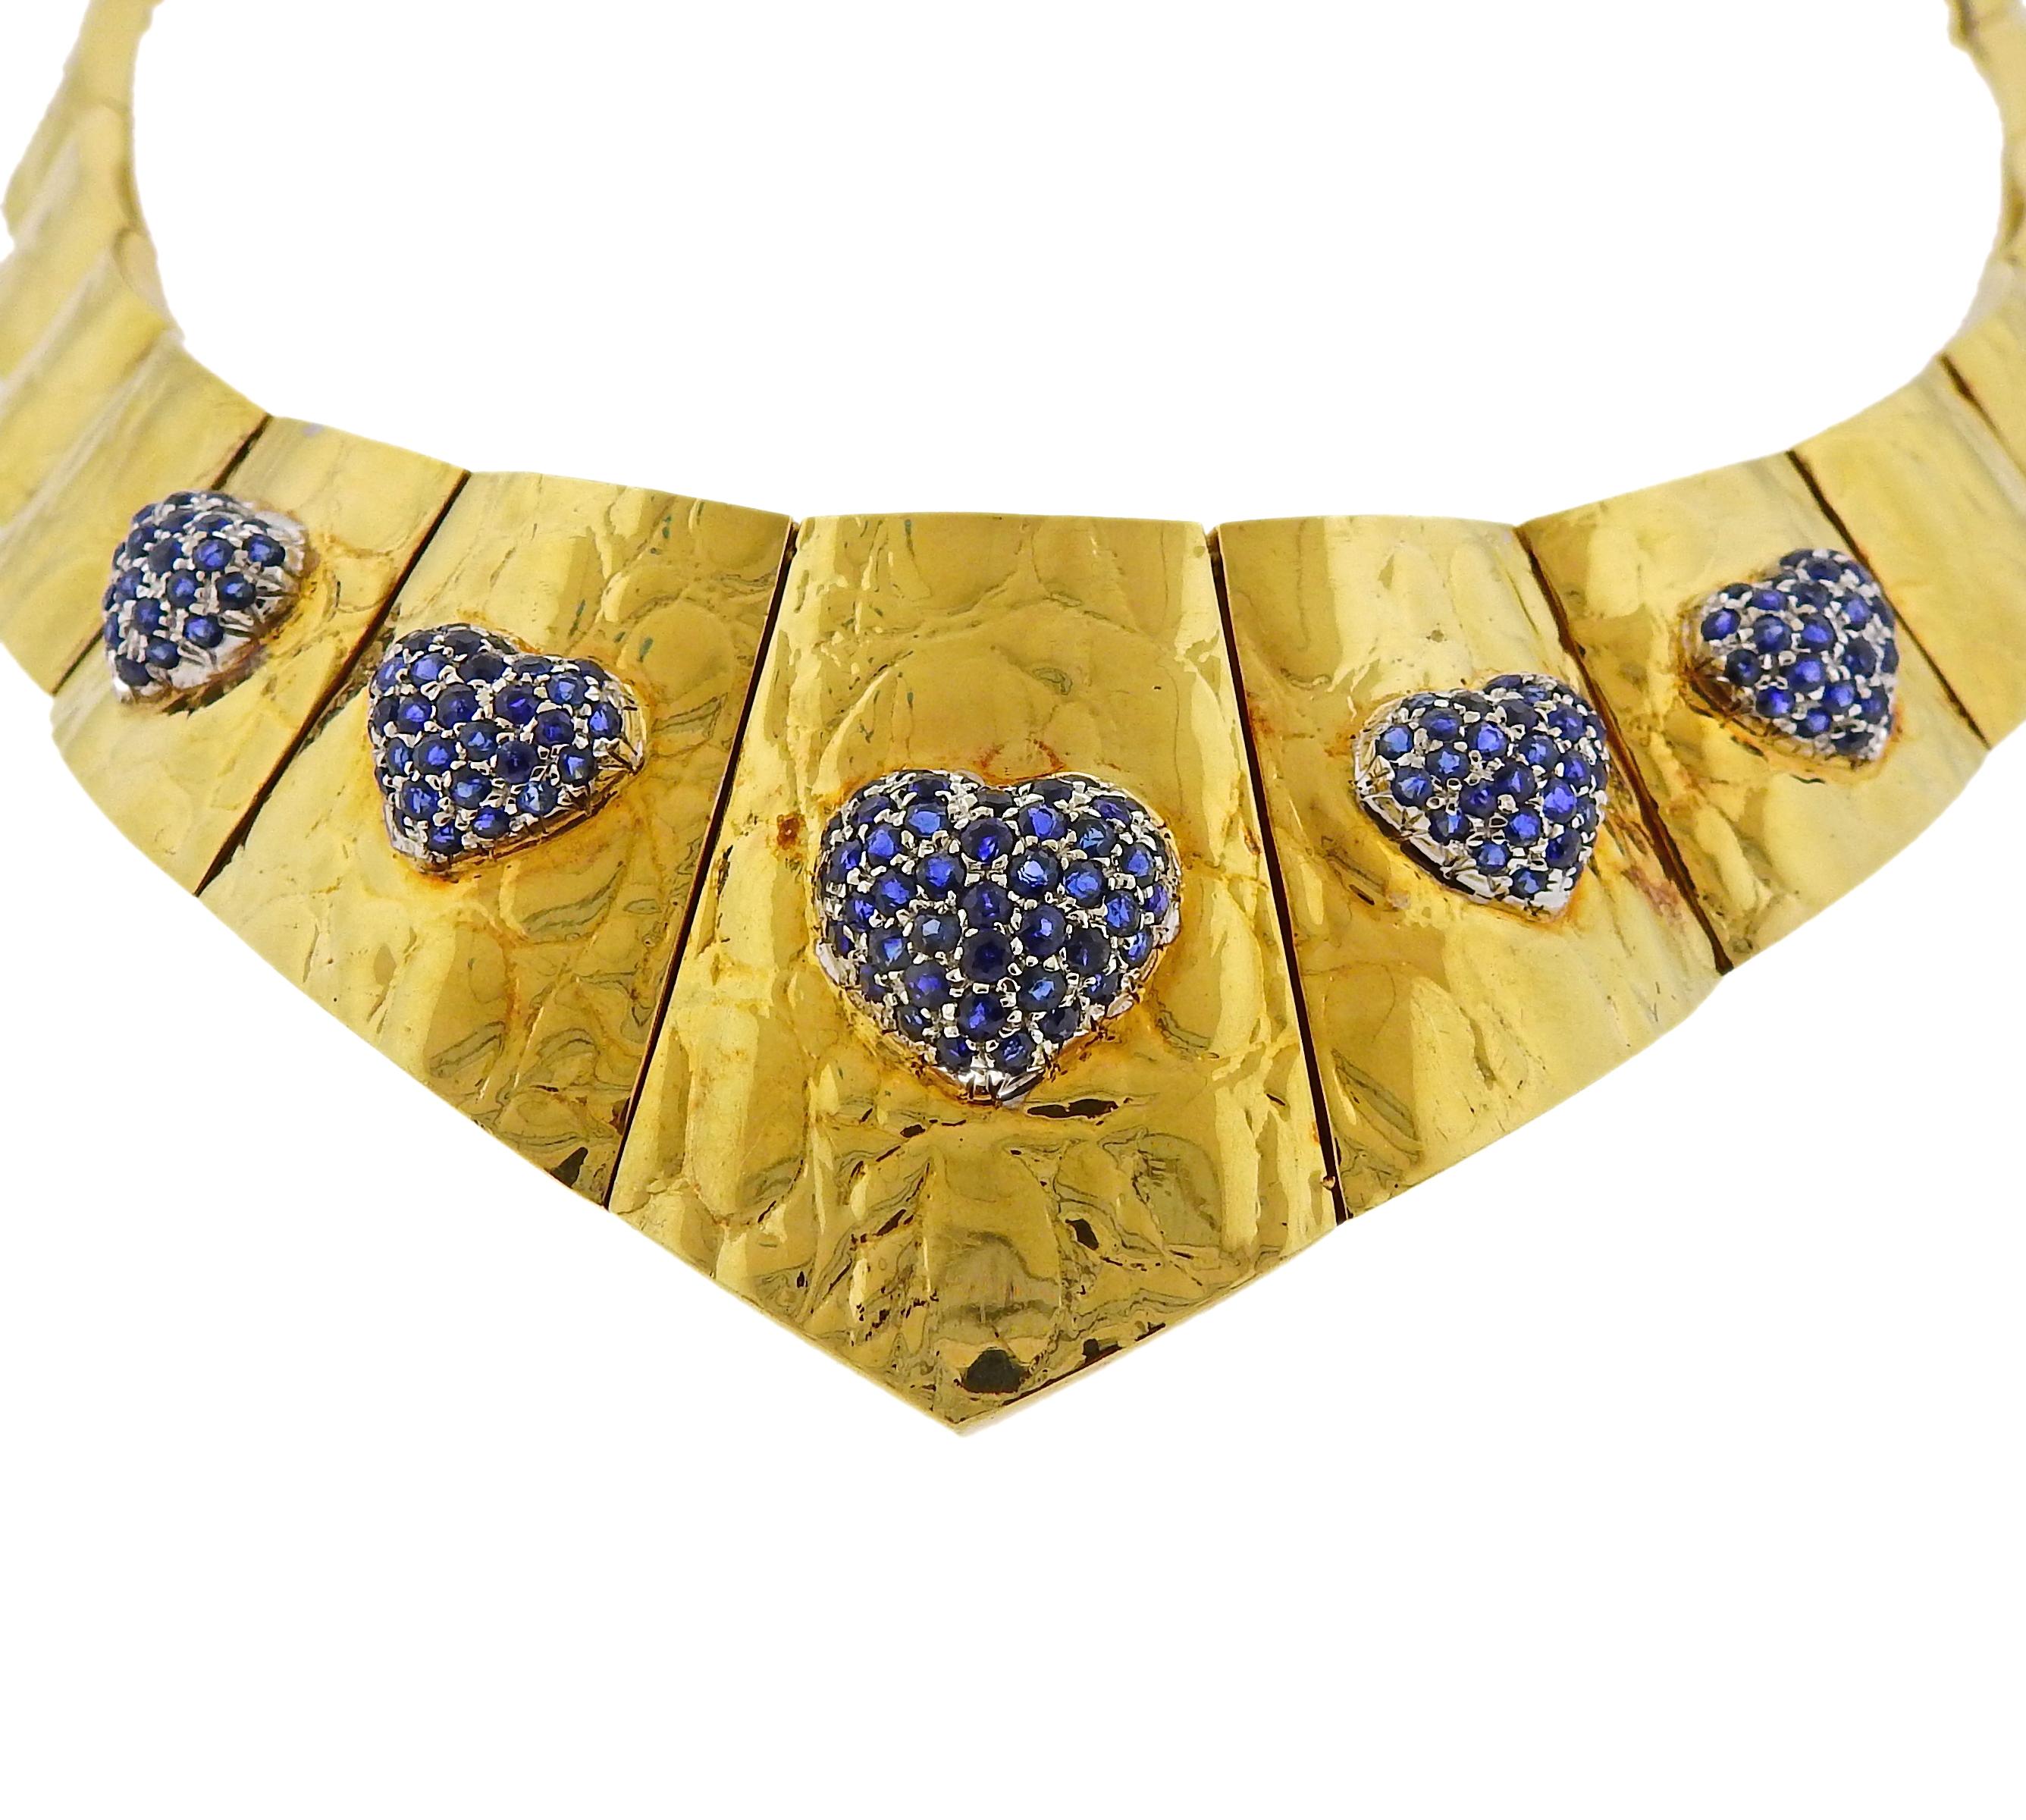 Vintage Gucci 18k gold necklace, featuring five blue sapphire set hearts. Necklace is 14.5' long and 40mm at the widest point. Marked Gucci, Italy, 750, 18k. Weighs 93.5 grams.

SKU#N-02940